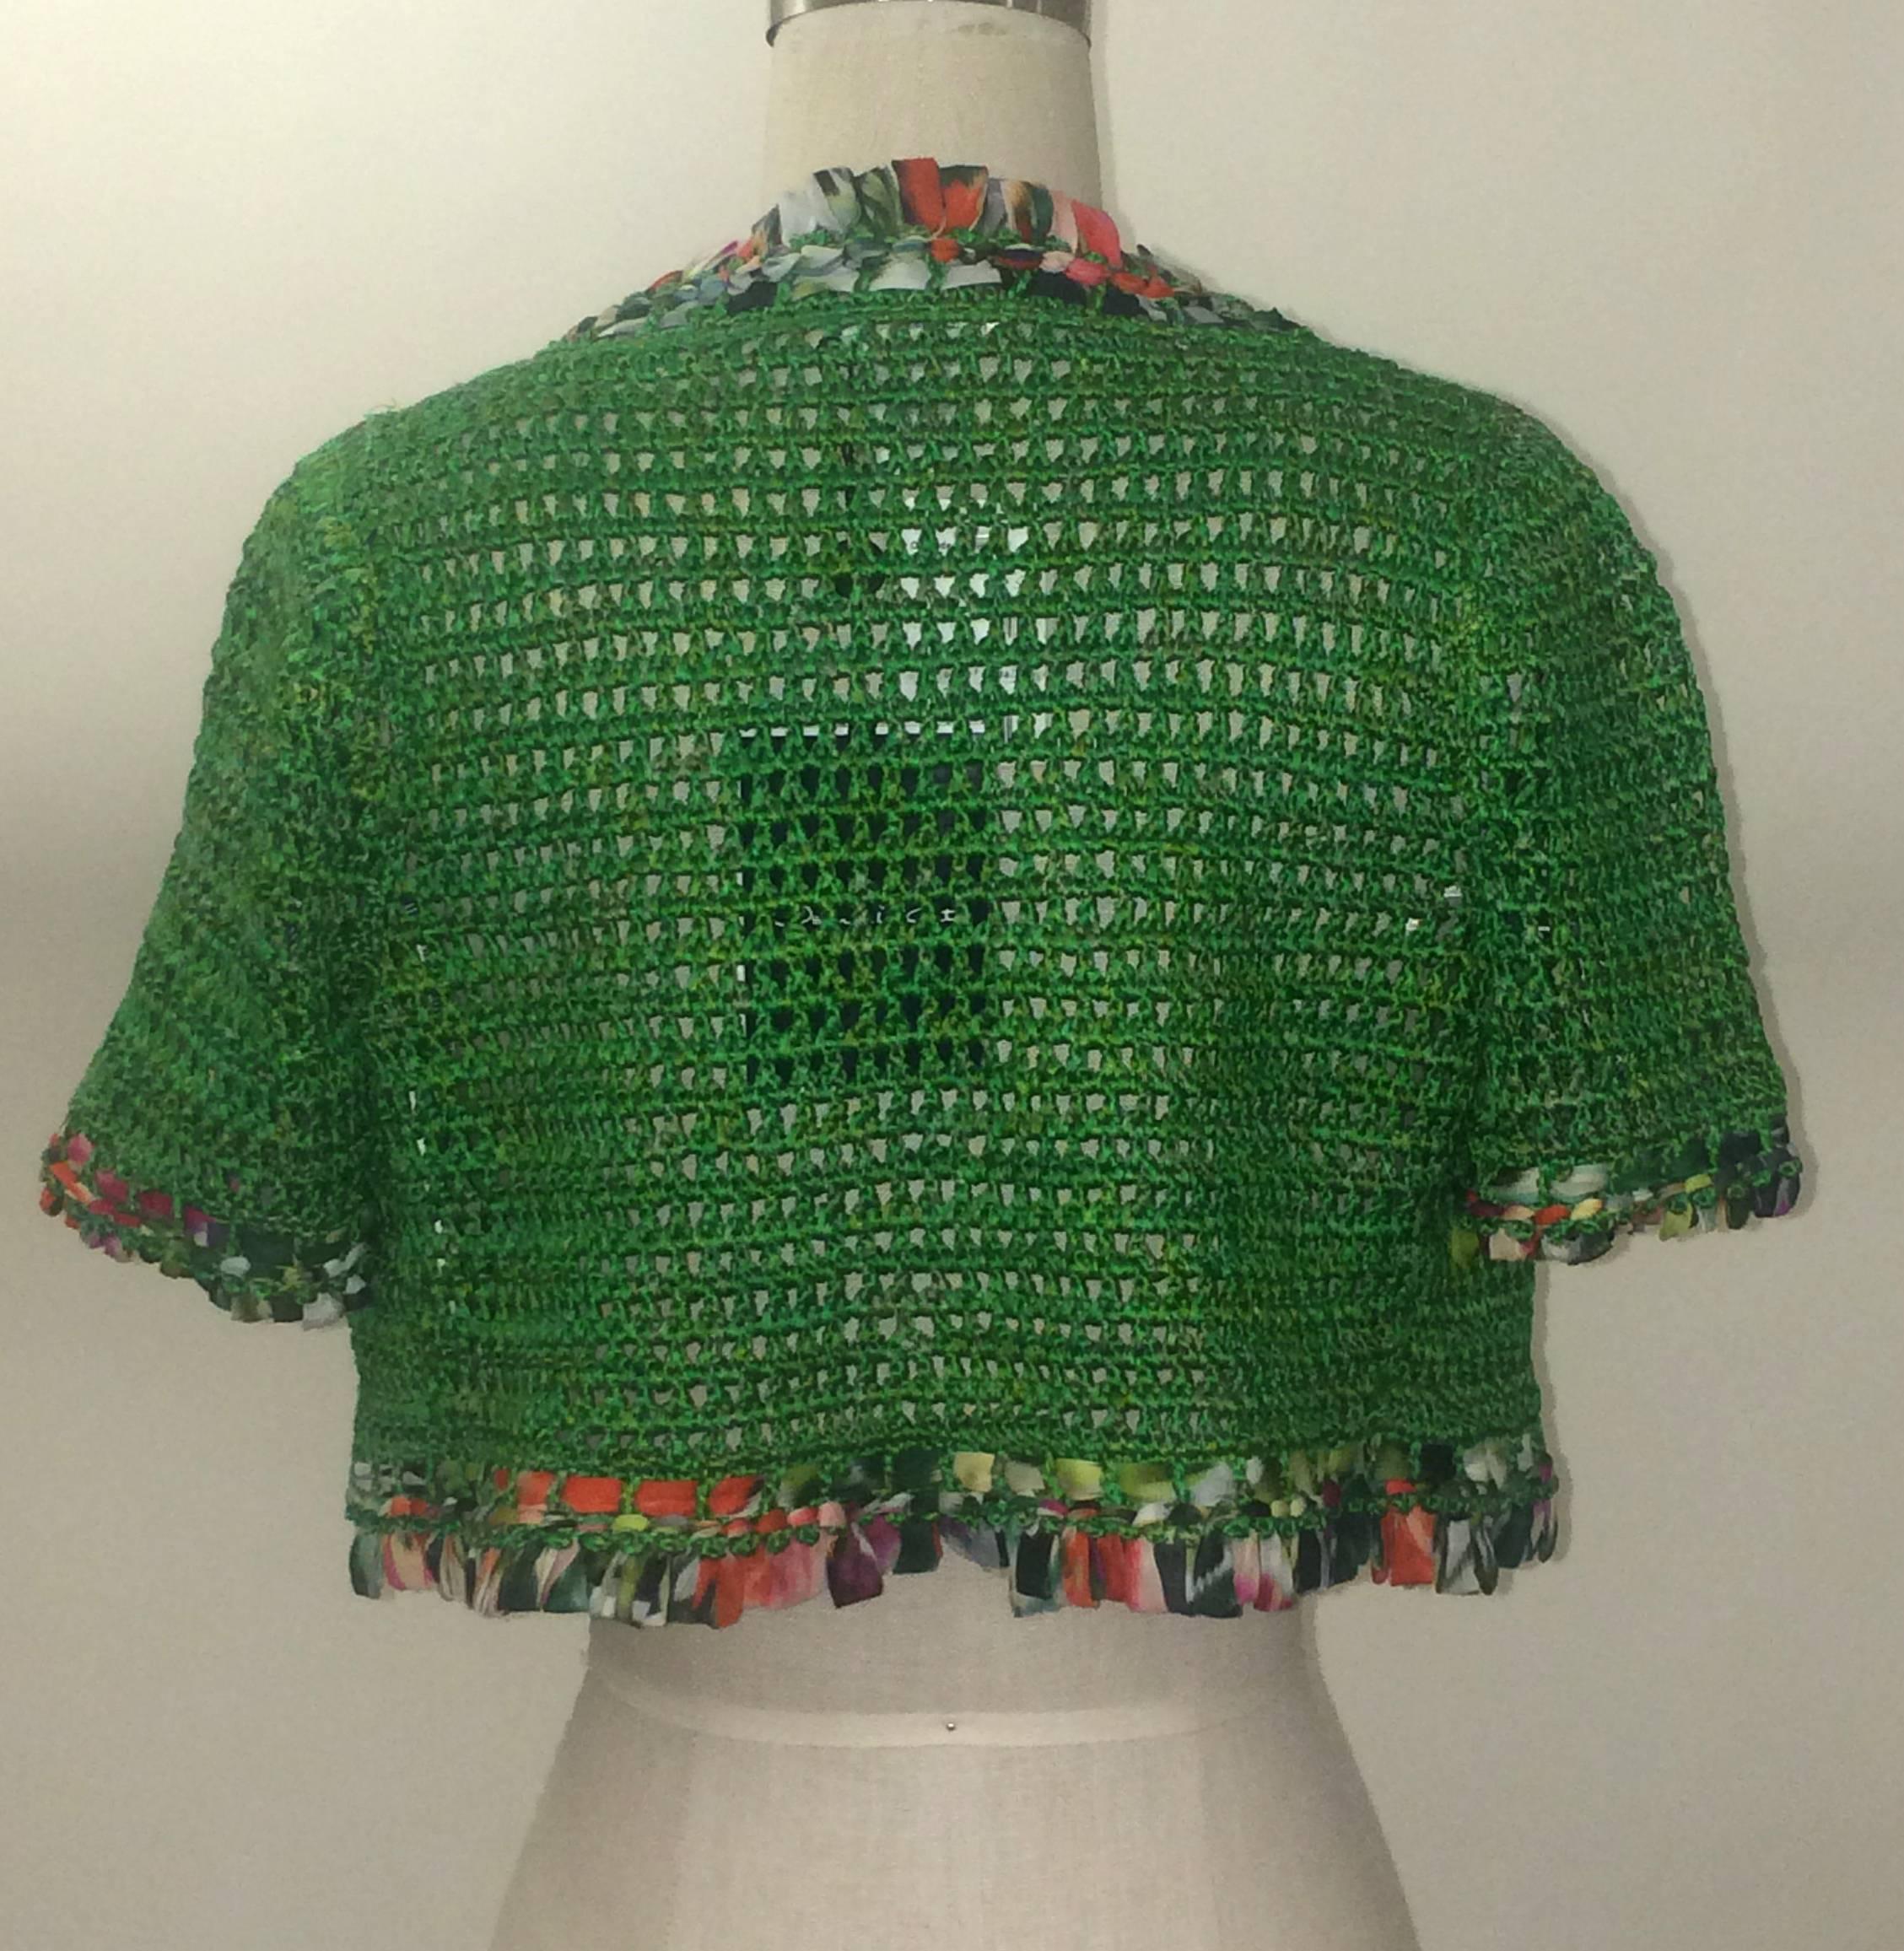 Oscar de la Renta hand knit green bolero with multicolored ribbon trim from the Resort 2014 collection. 

100% silk.

Made in Bolivia.

Size S/P
Bust 32